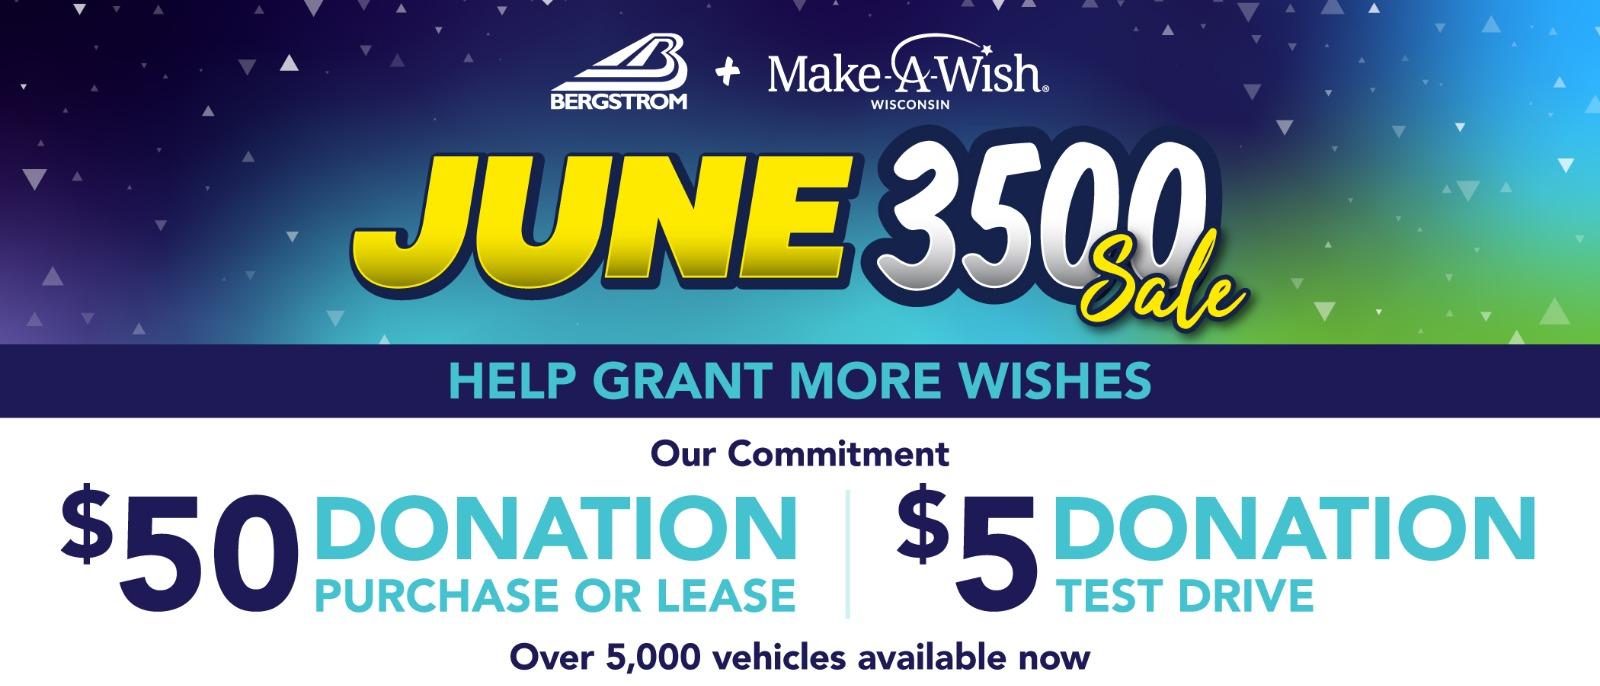 June 3500 Make-A-Wish Help Gant More Wishes